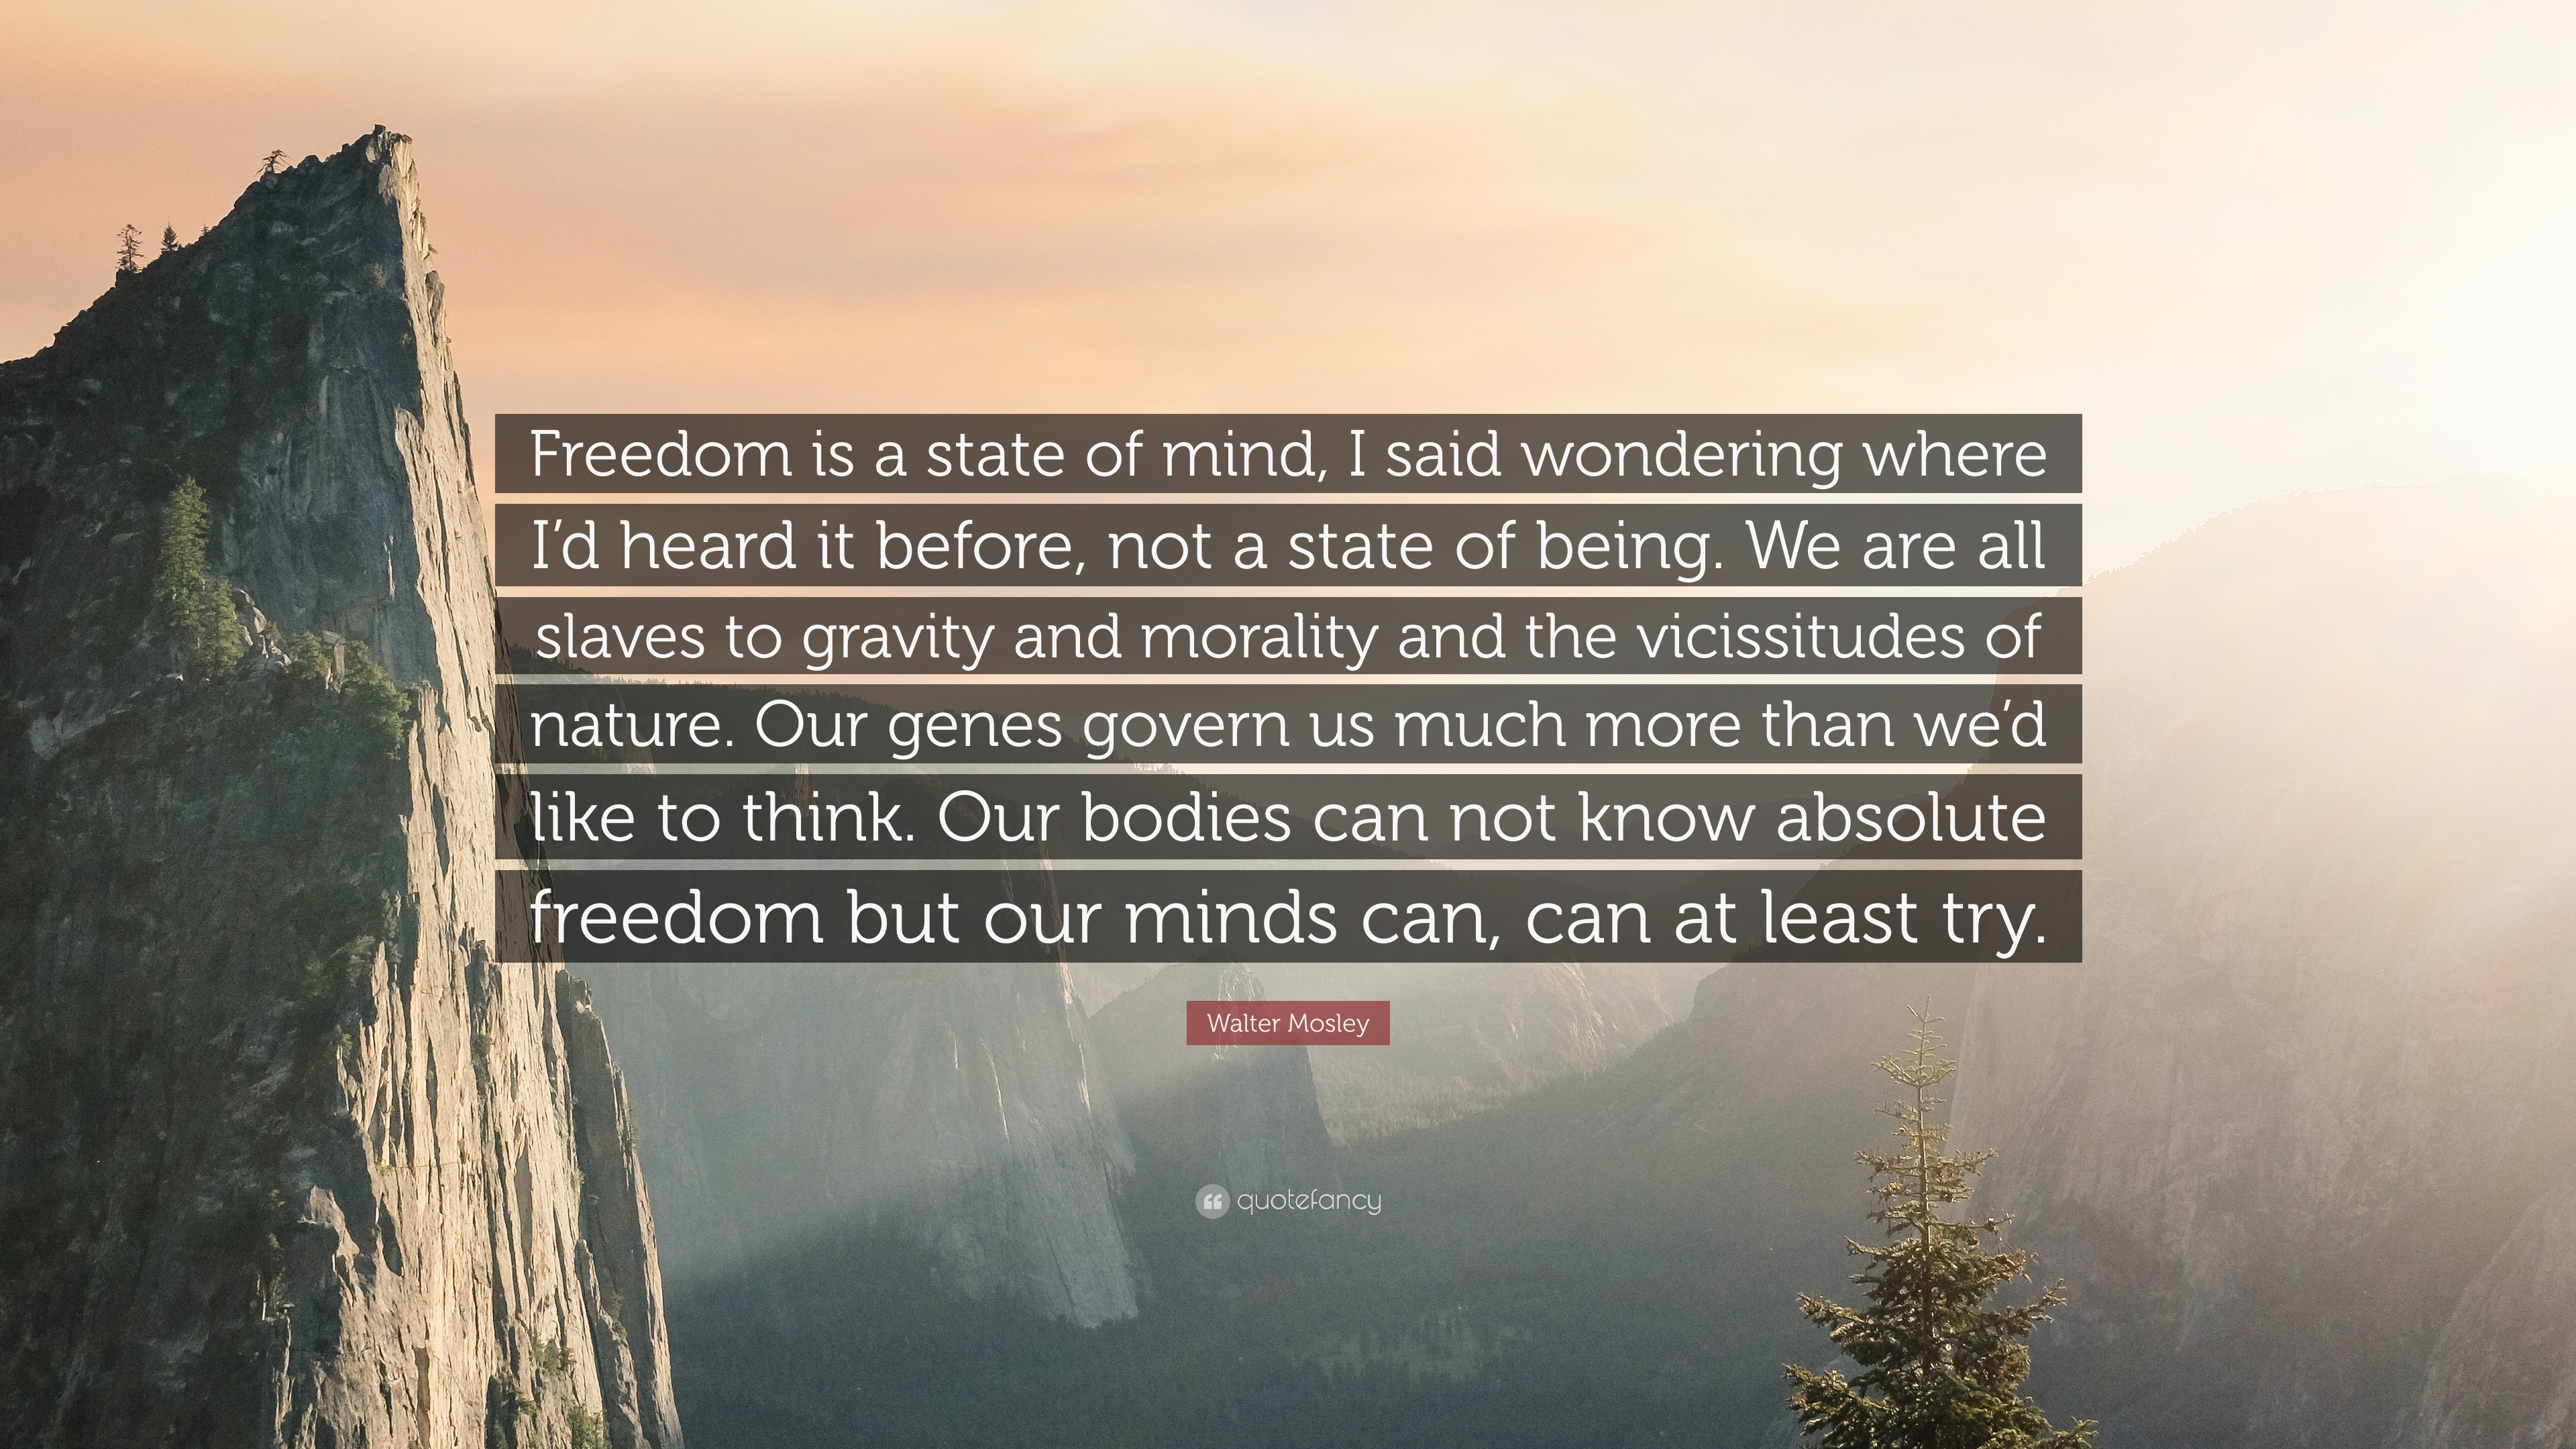 Freedom is a State of Mind!